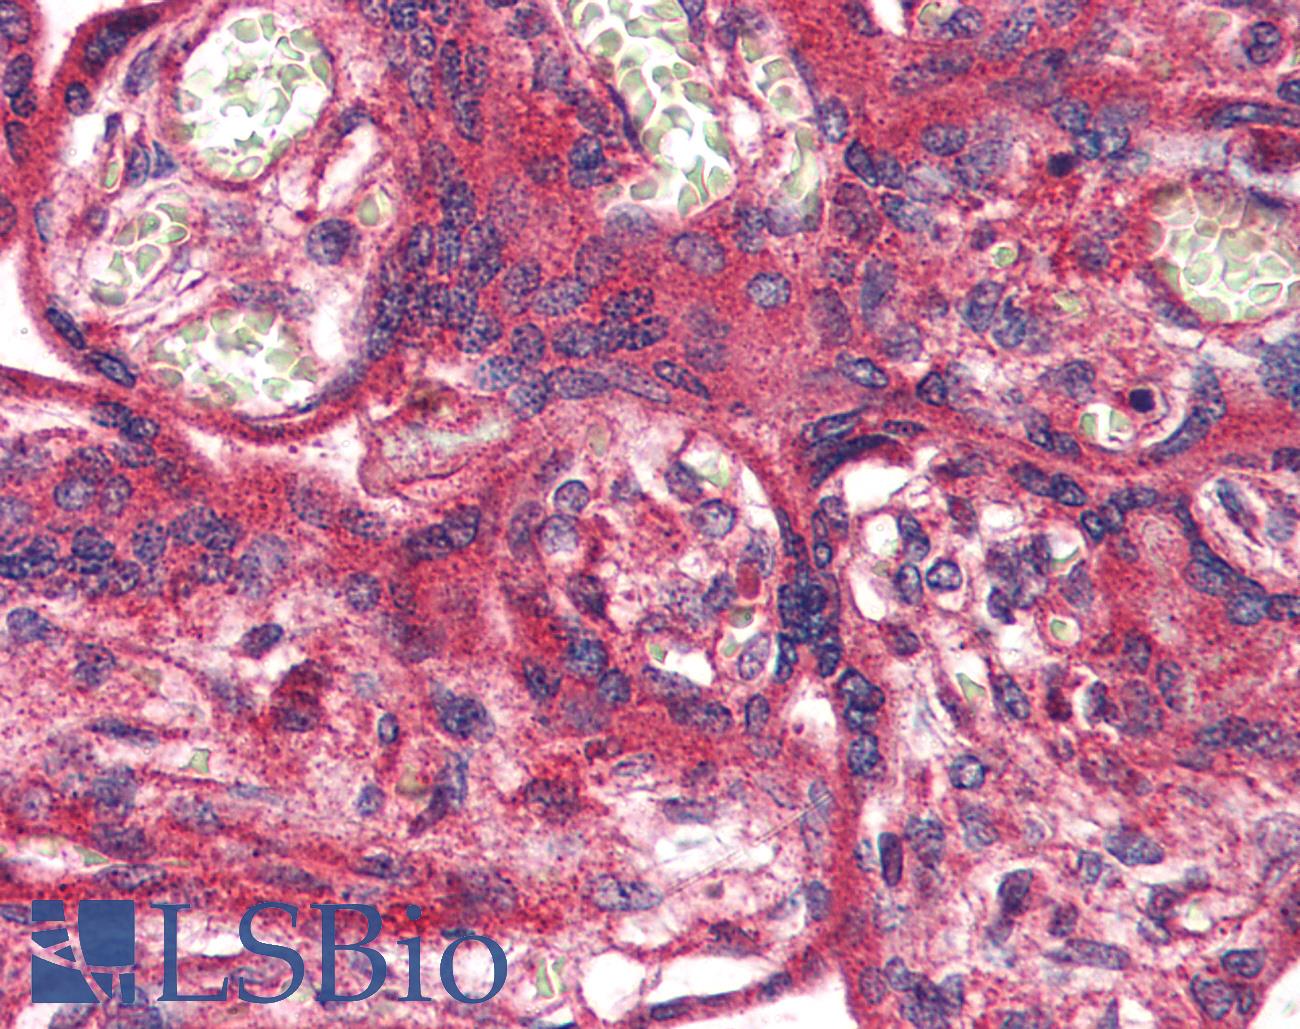 OR51E1 Antibody - Anti-OR51E1 antibody IHC of human placenta. Immunohistochemistry of formalin-fixed, paraffin-embedded tissue after heat-induced antigen retrieval.